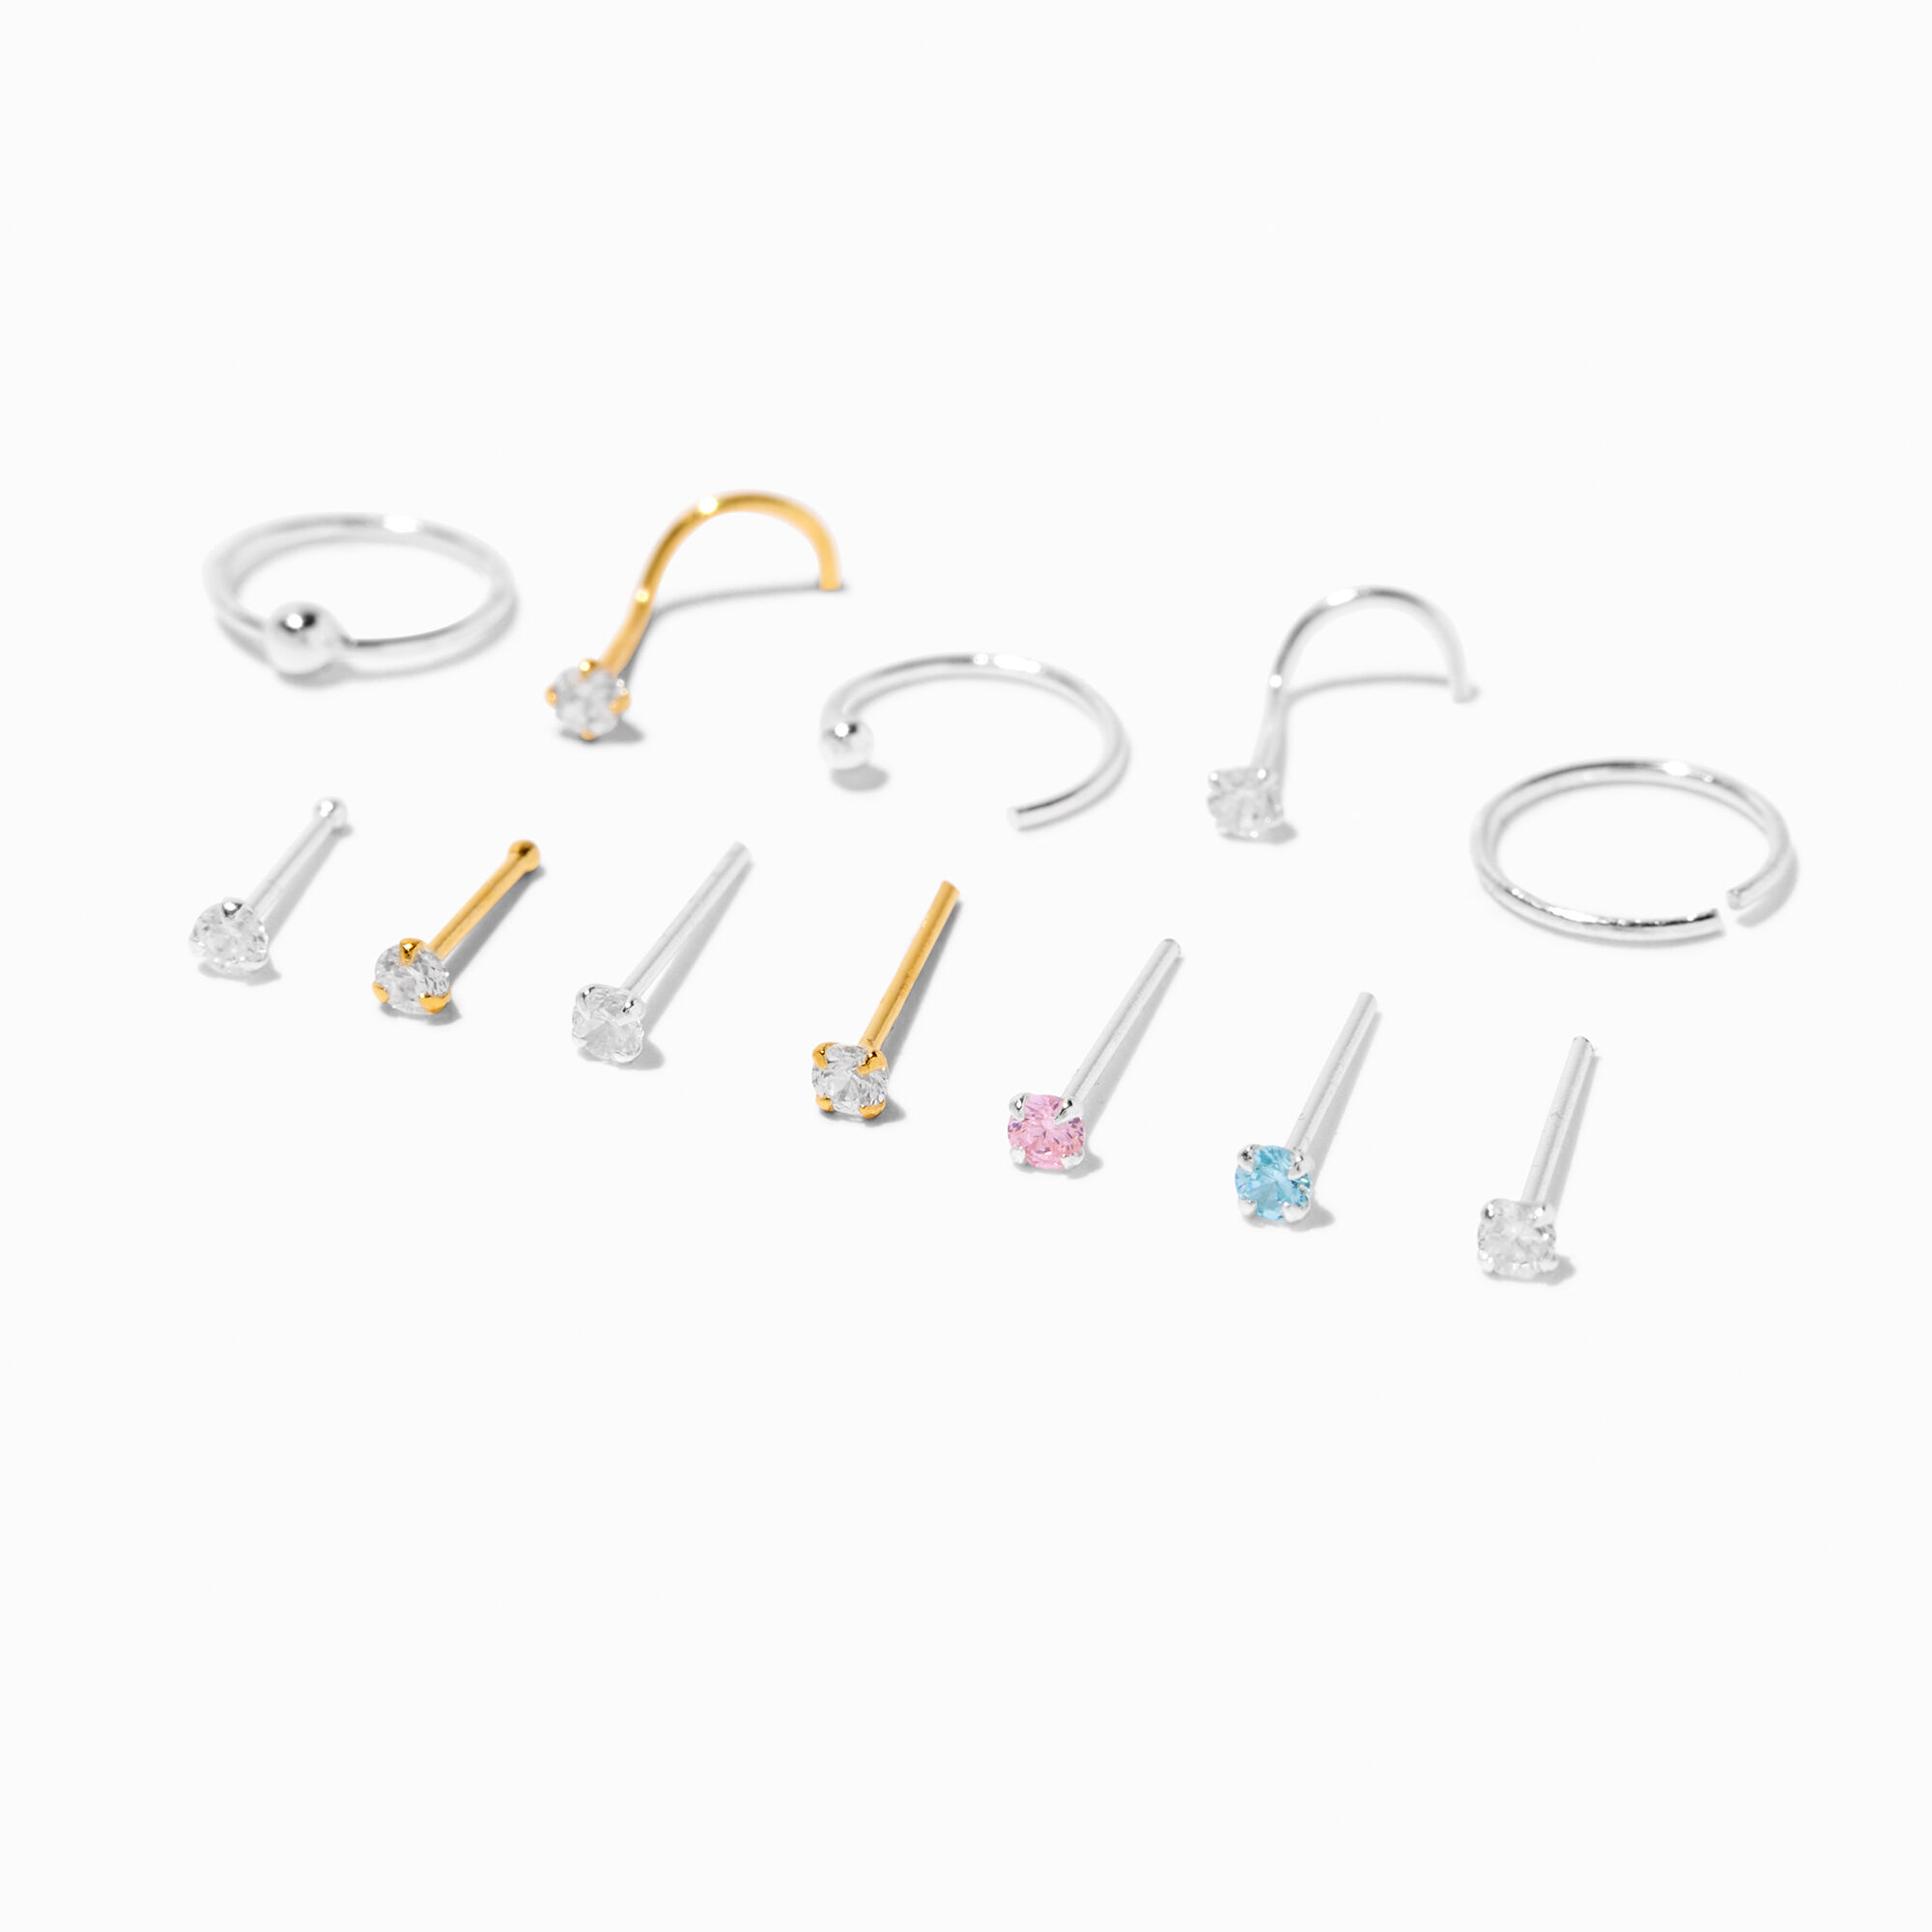 View Claires 22G Mixed Nose Studs Hoop 12 Pack Silver information